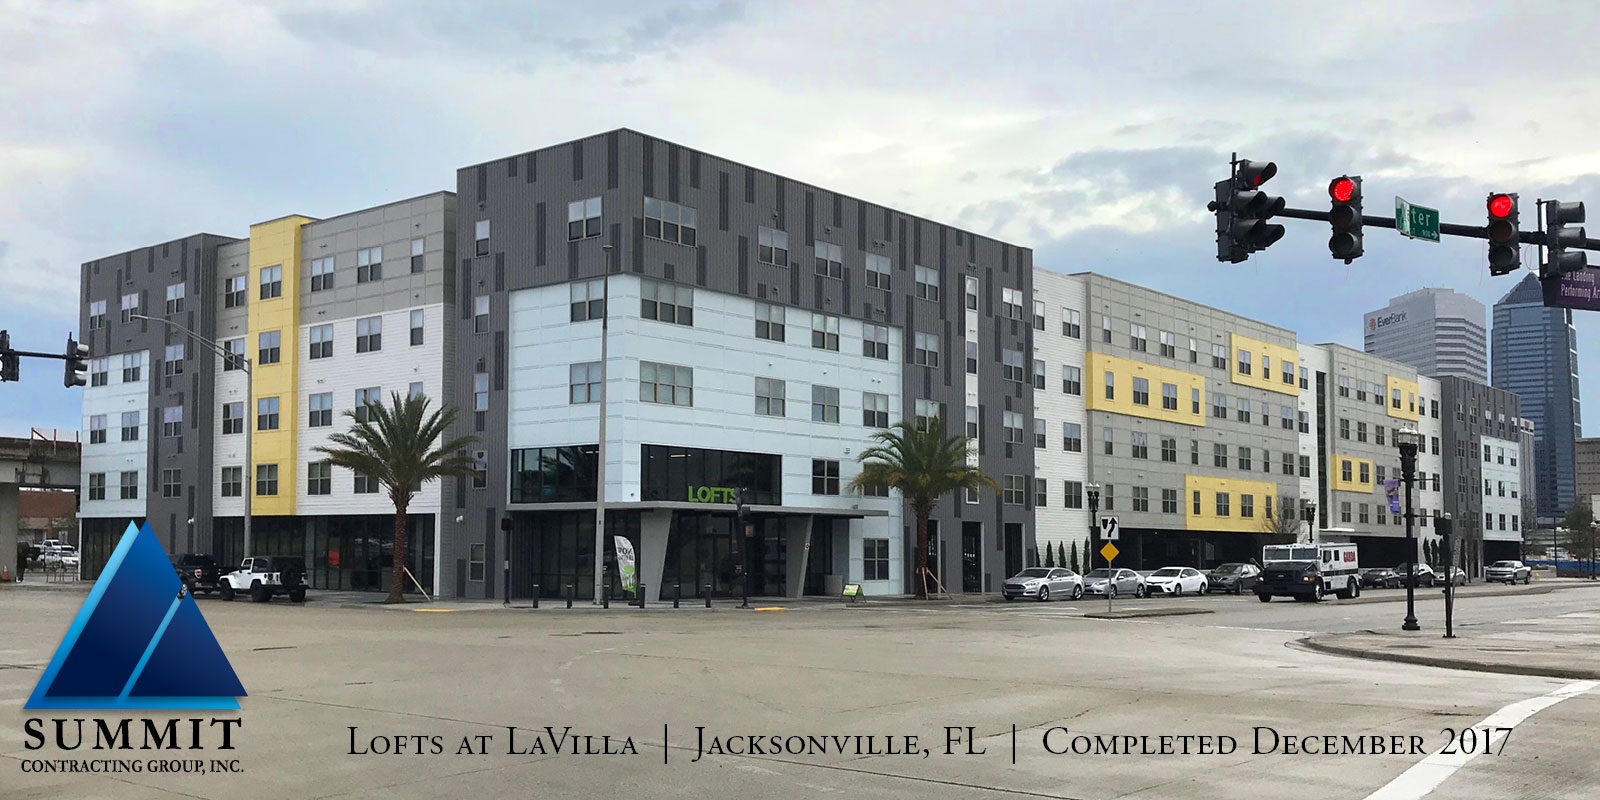 Exterior of building for The Lofts at LaVilla Tax Credit Apartments completed in December 2017